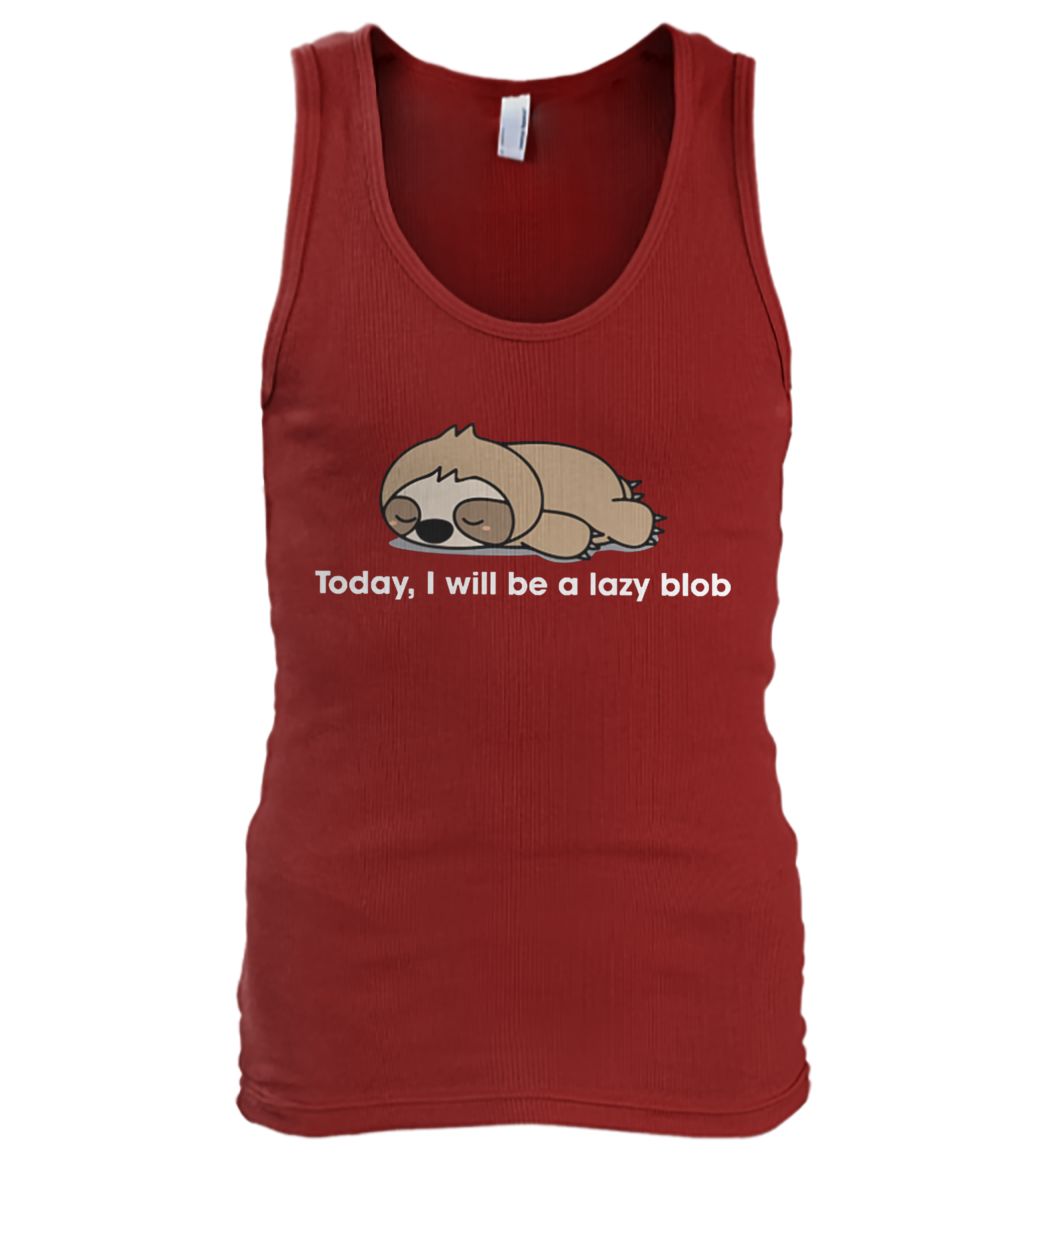 Sloth to day I will be a lady blob men's tank top